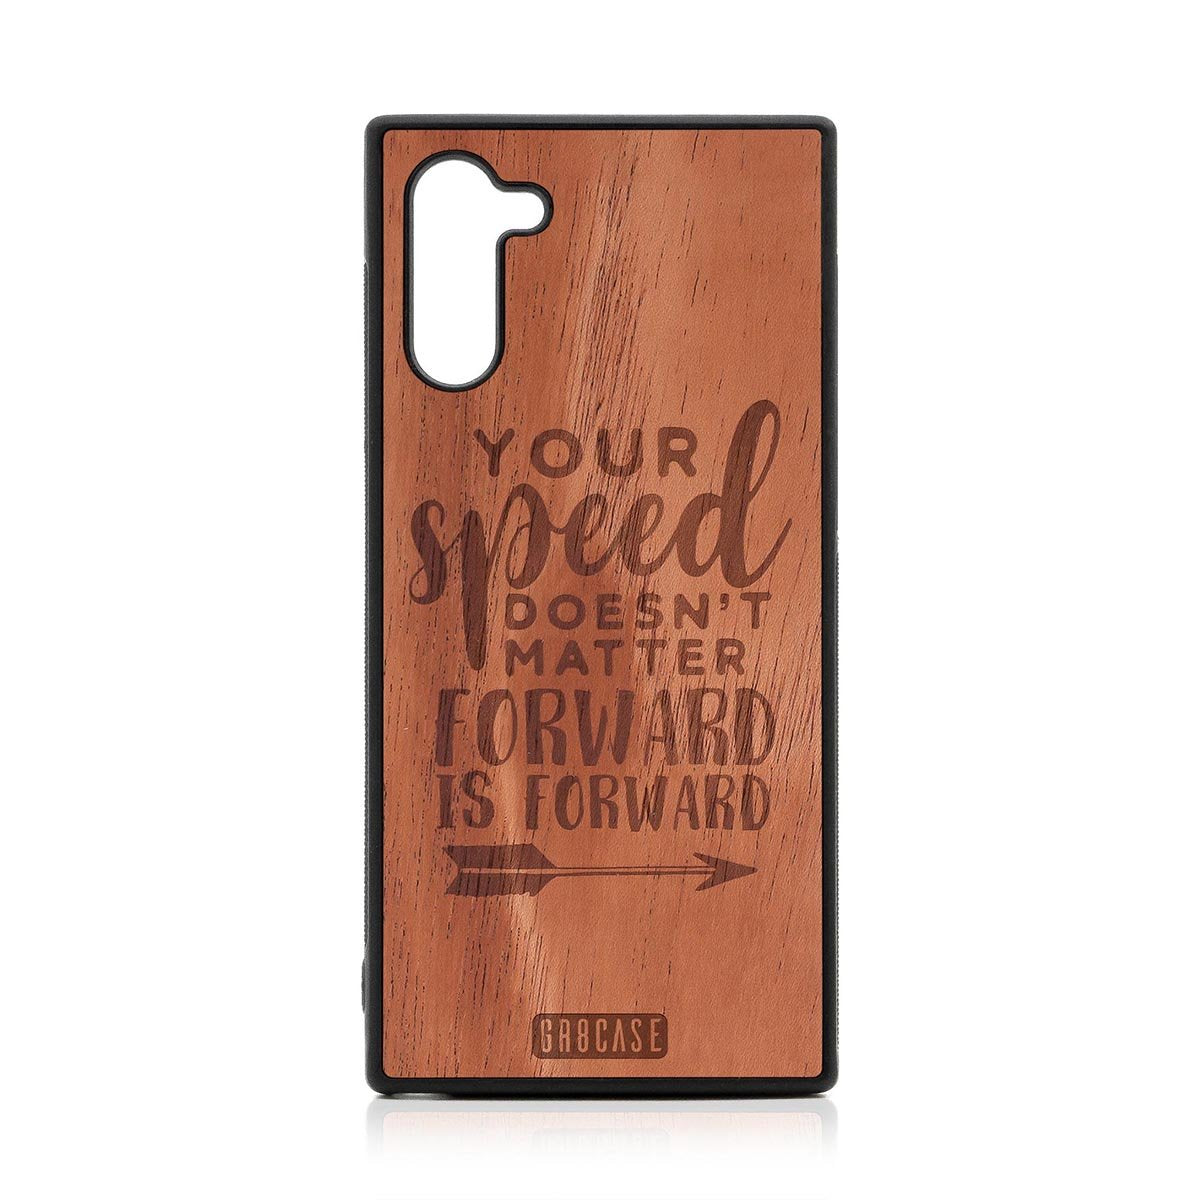 Your Speed Doesn't Matter Forward Is Forward Design Wood Case Samsung Galaxy Note 10